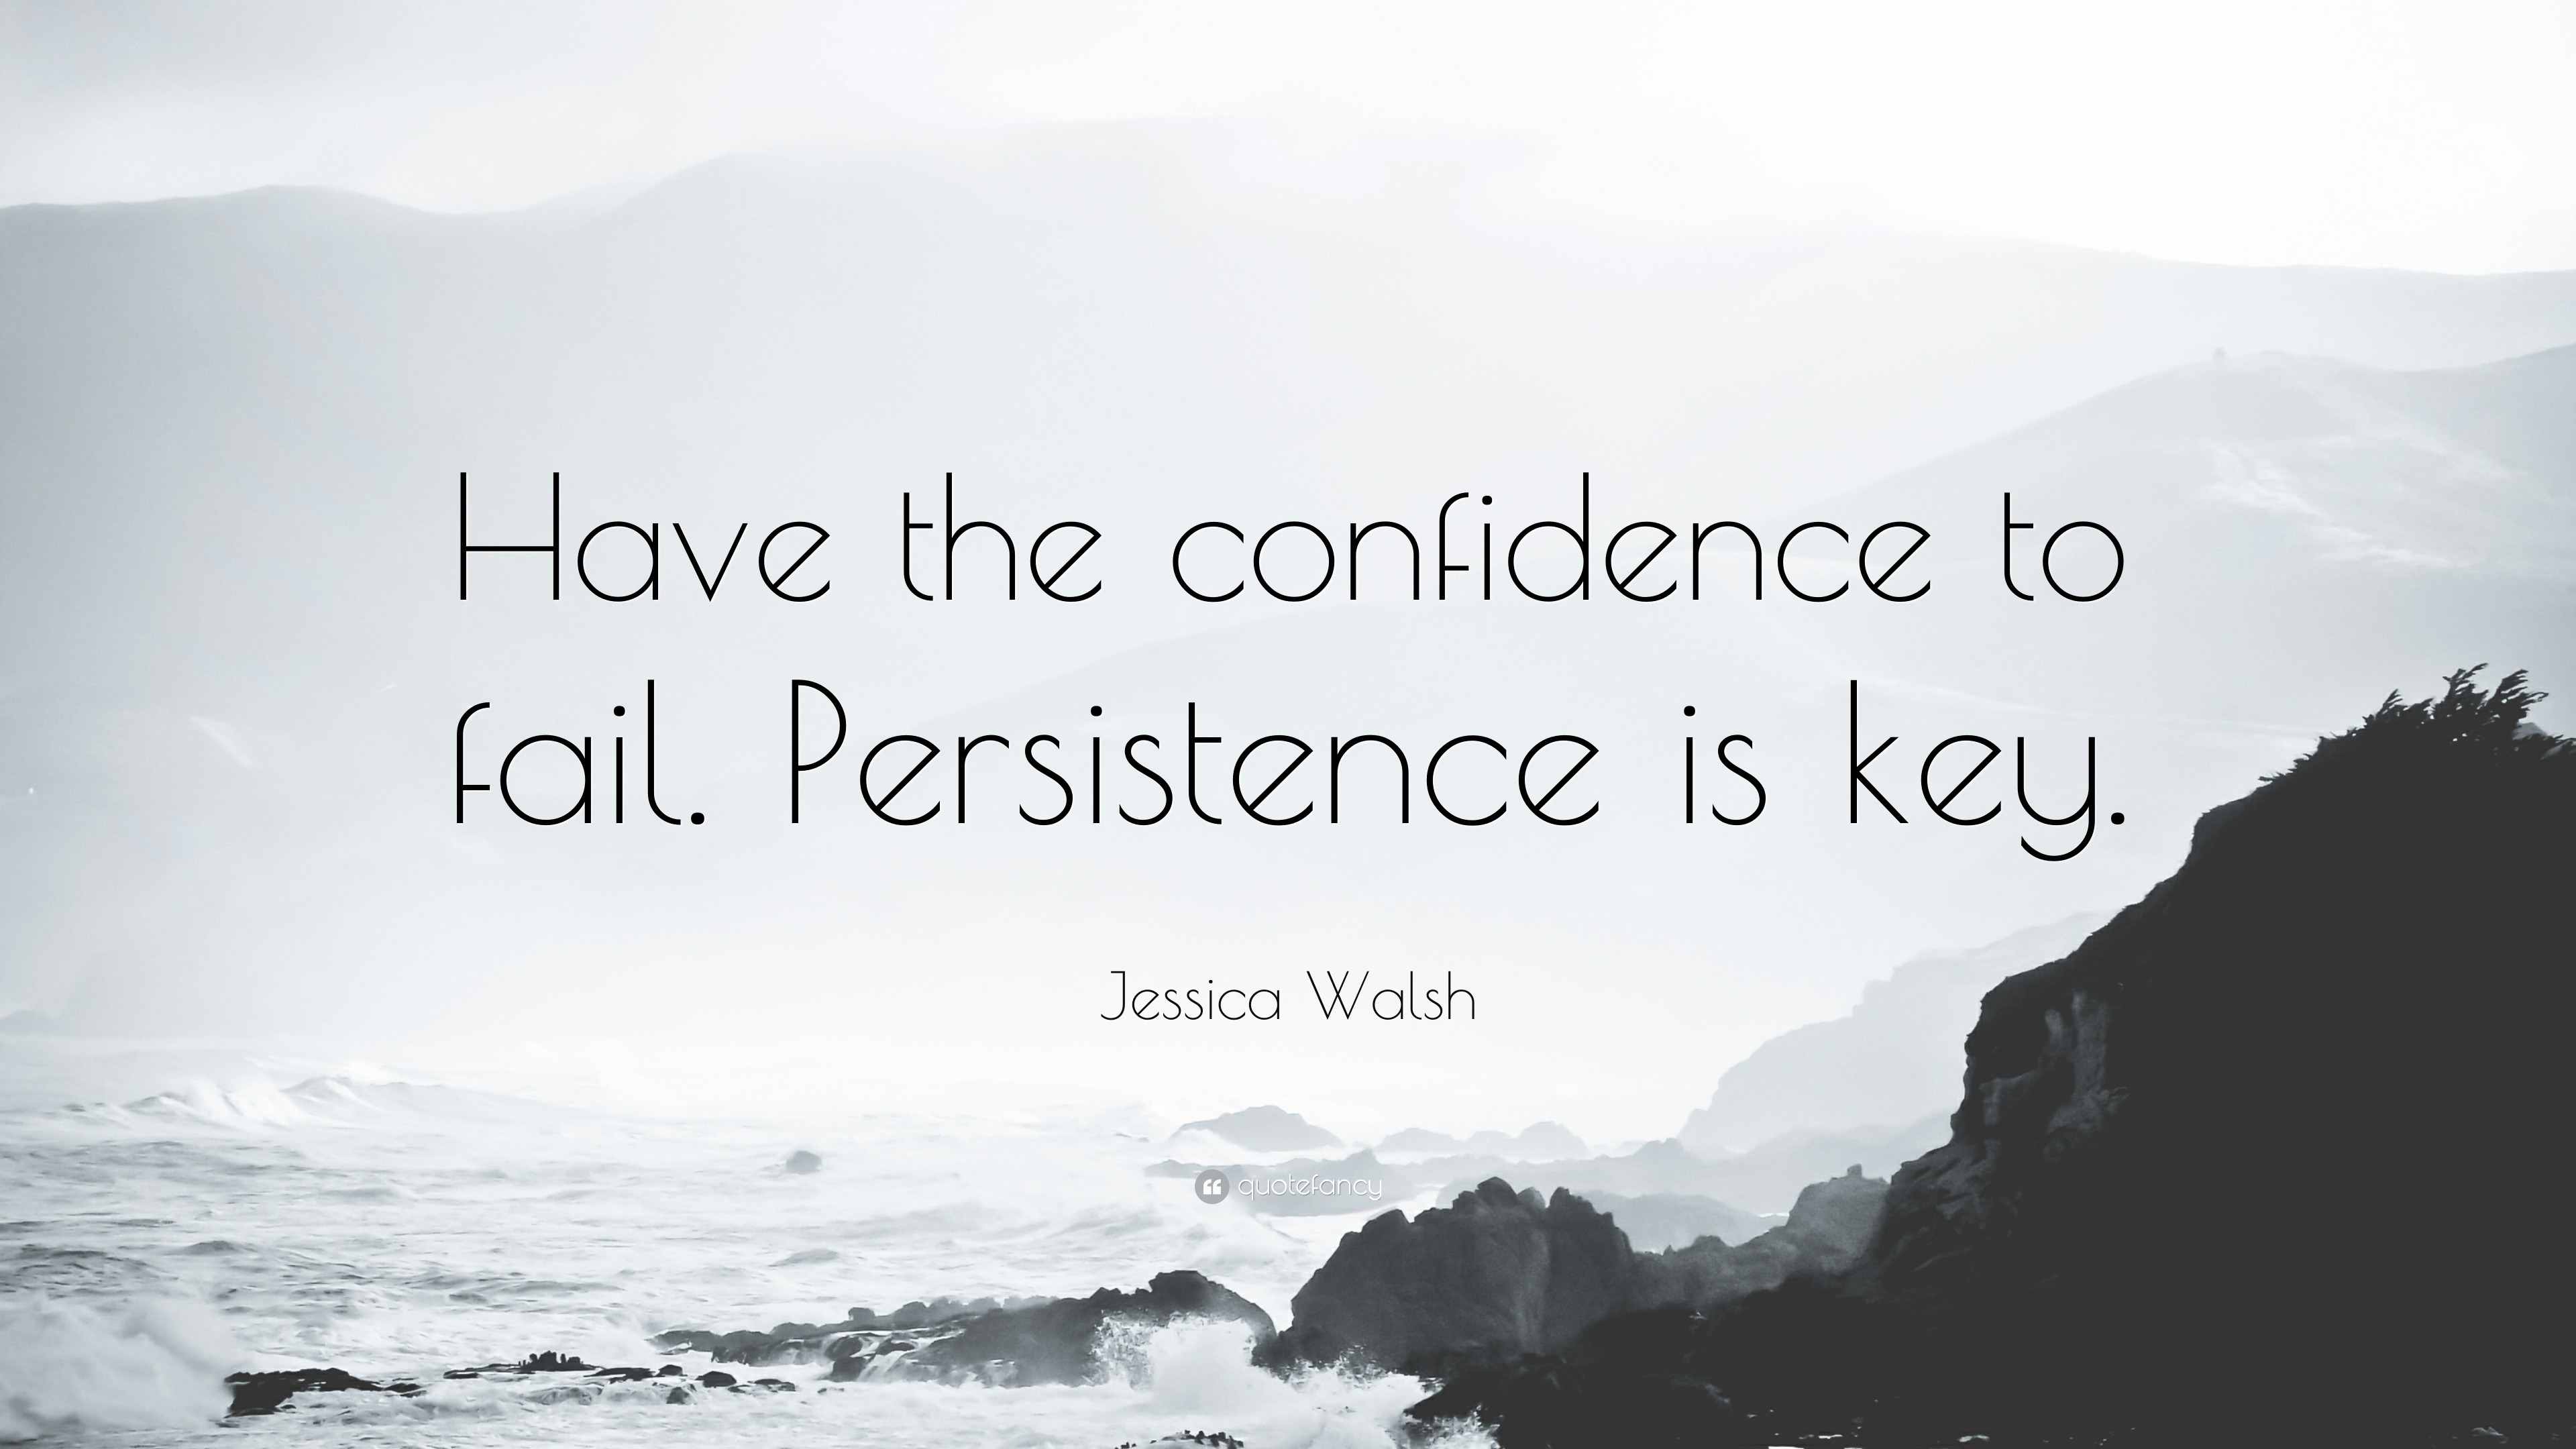 Jessica Walsh Quote: “Have the confidence to fail. Persistence is key.”